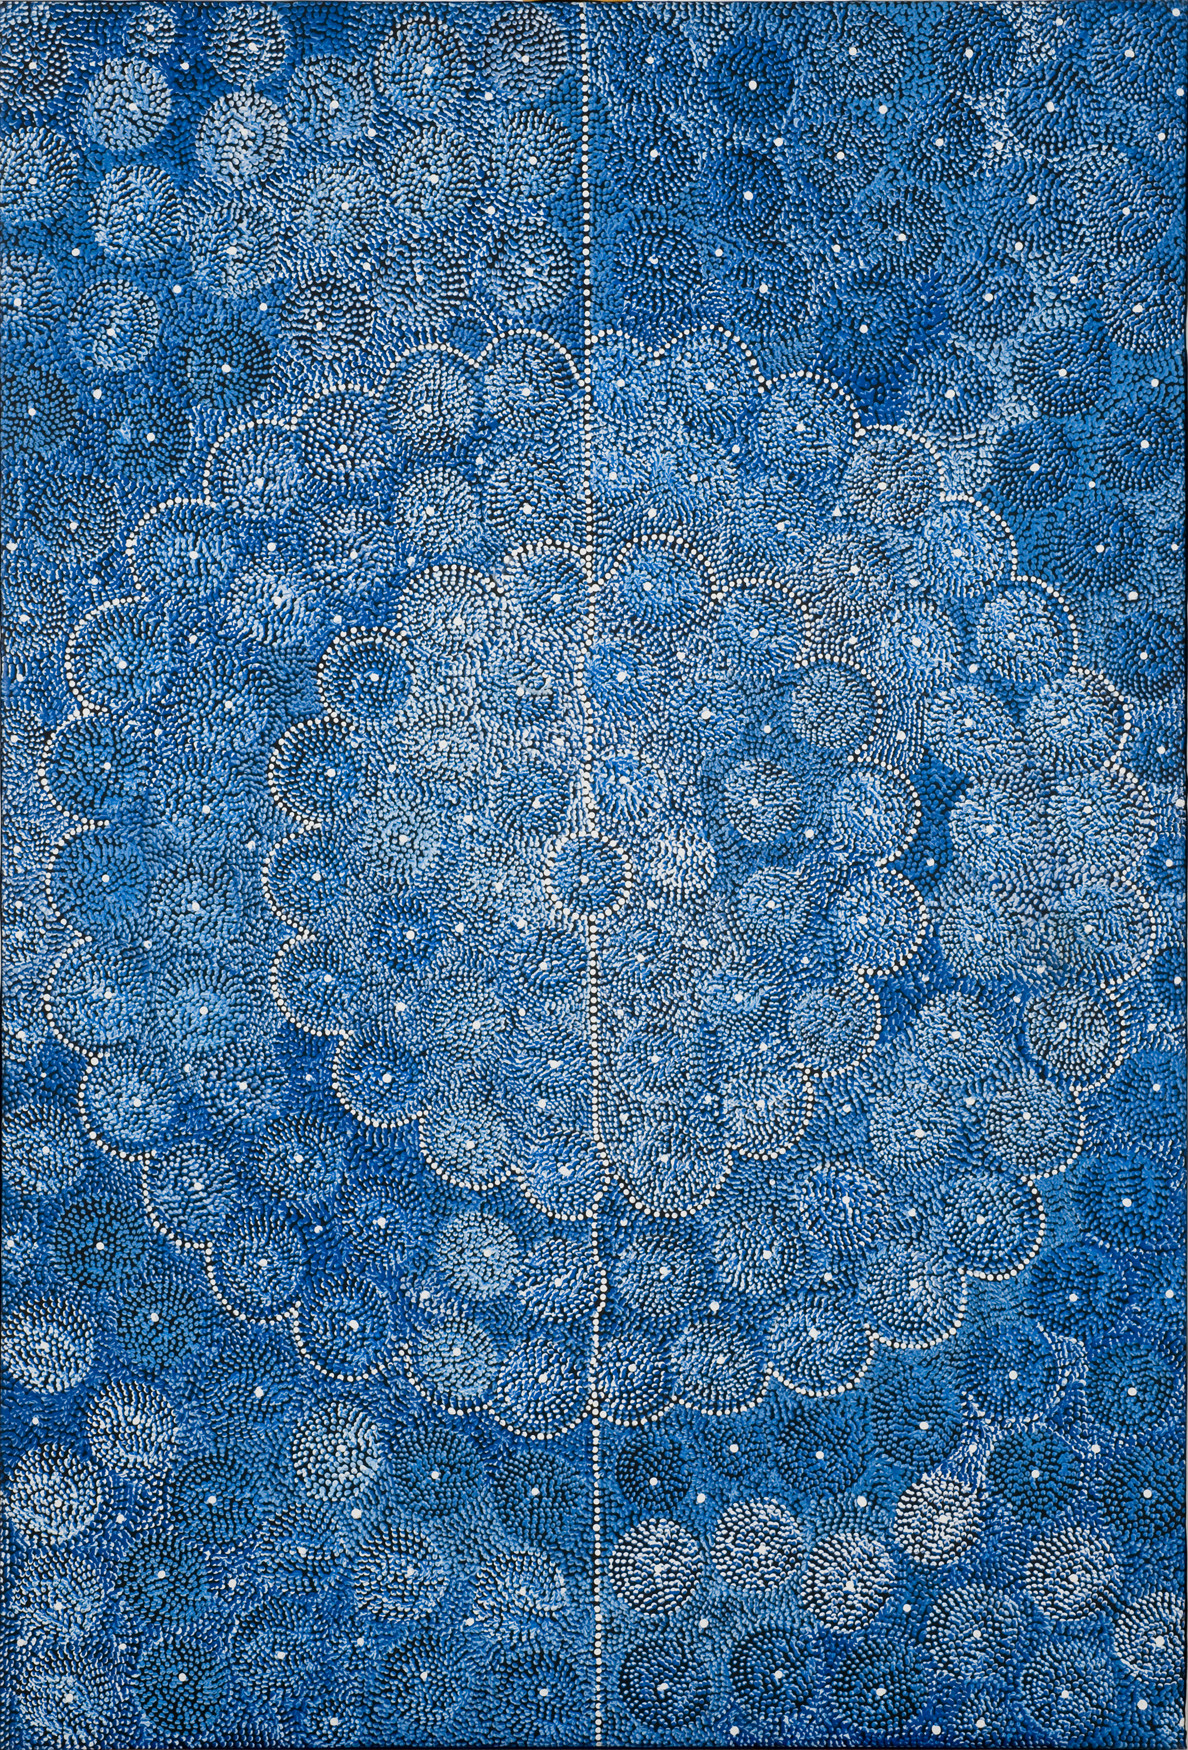 Tiny dots in white and various, rich shades of blue arranged to form circles. The circles are arranged into larger, concentric, white scallop-edged blue circles with a white dotted line going down the center.